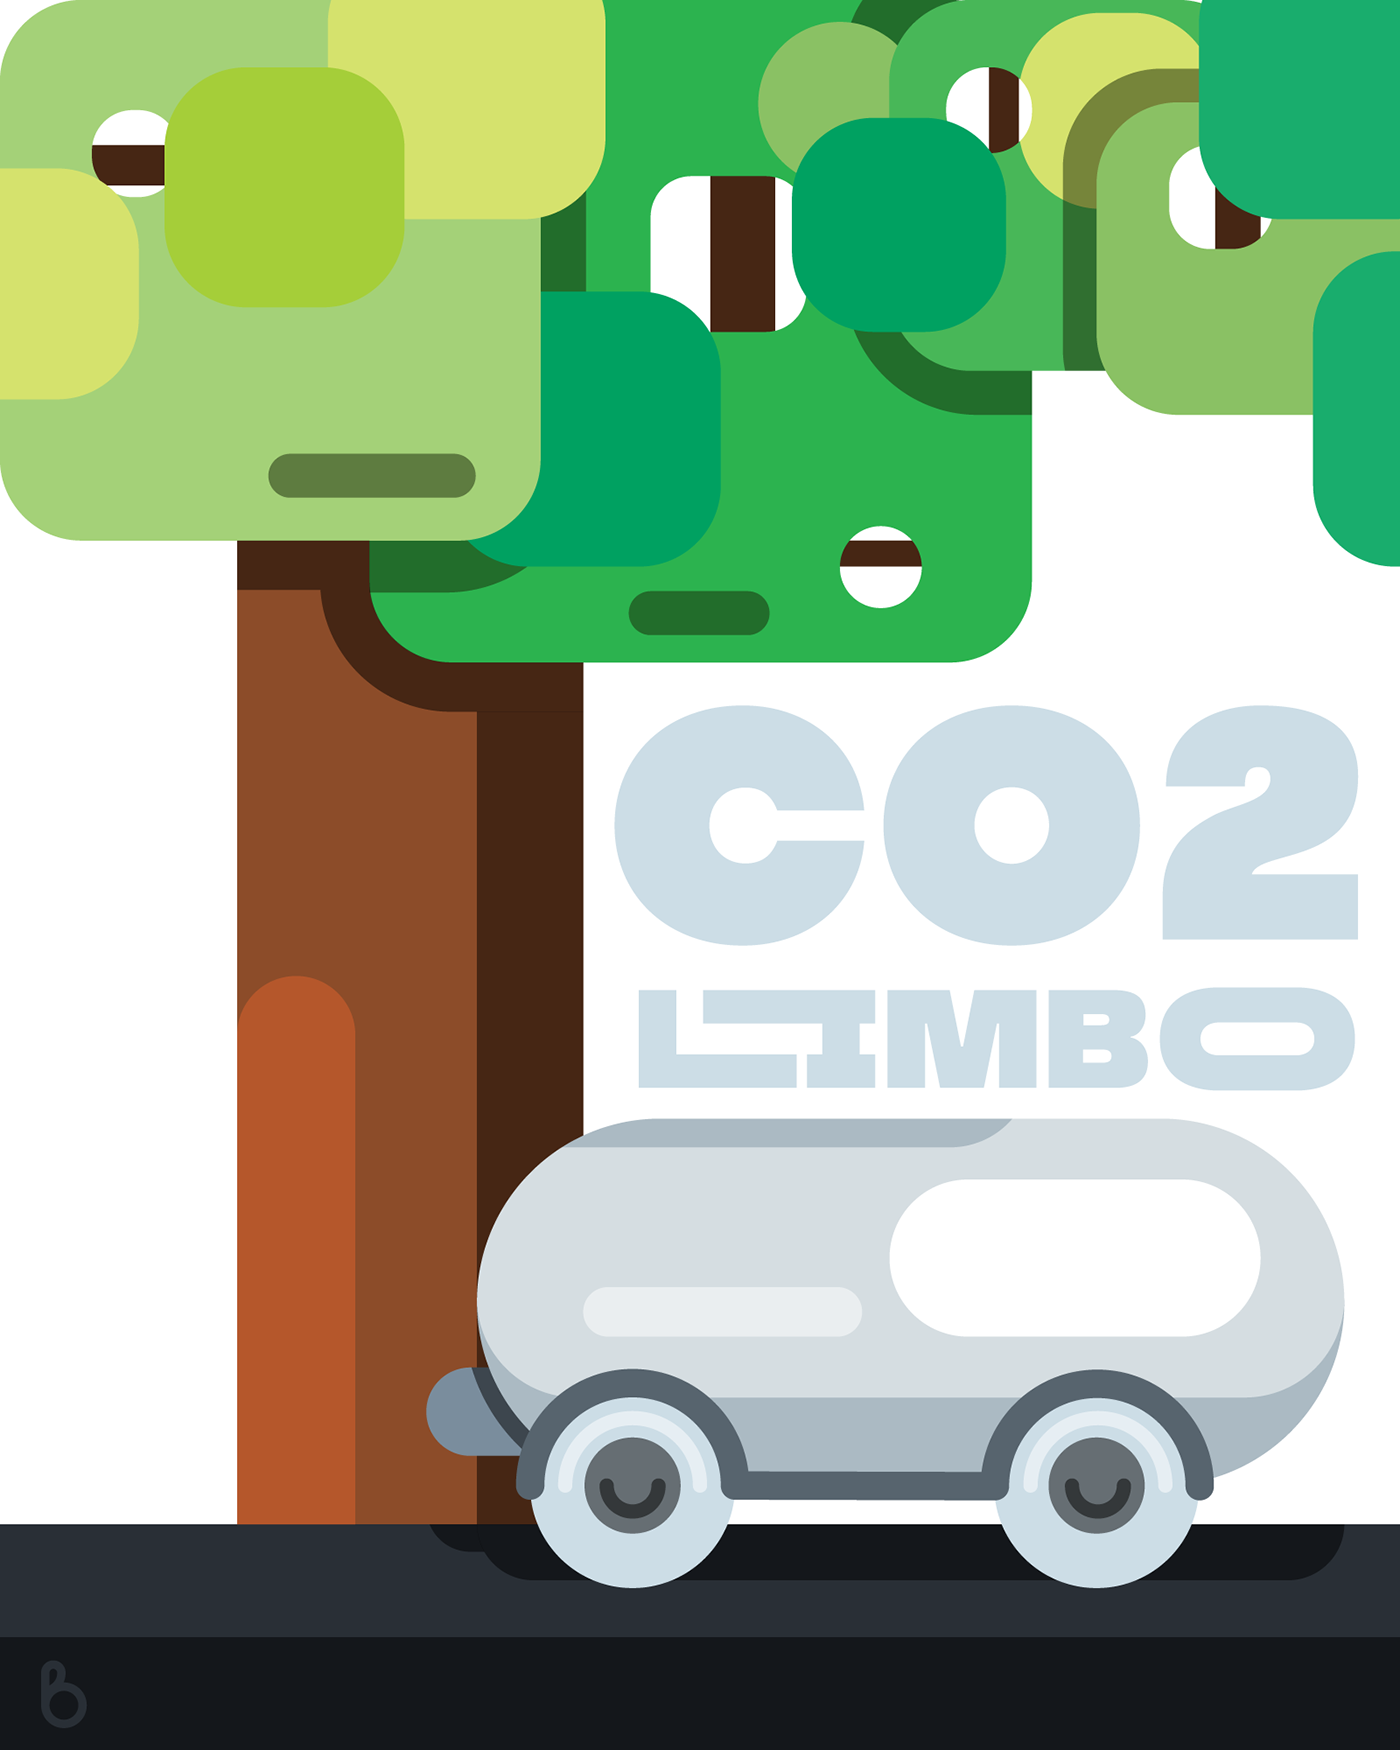 A poster about CO2 Limbo featuring a tree over a car.